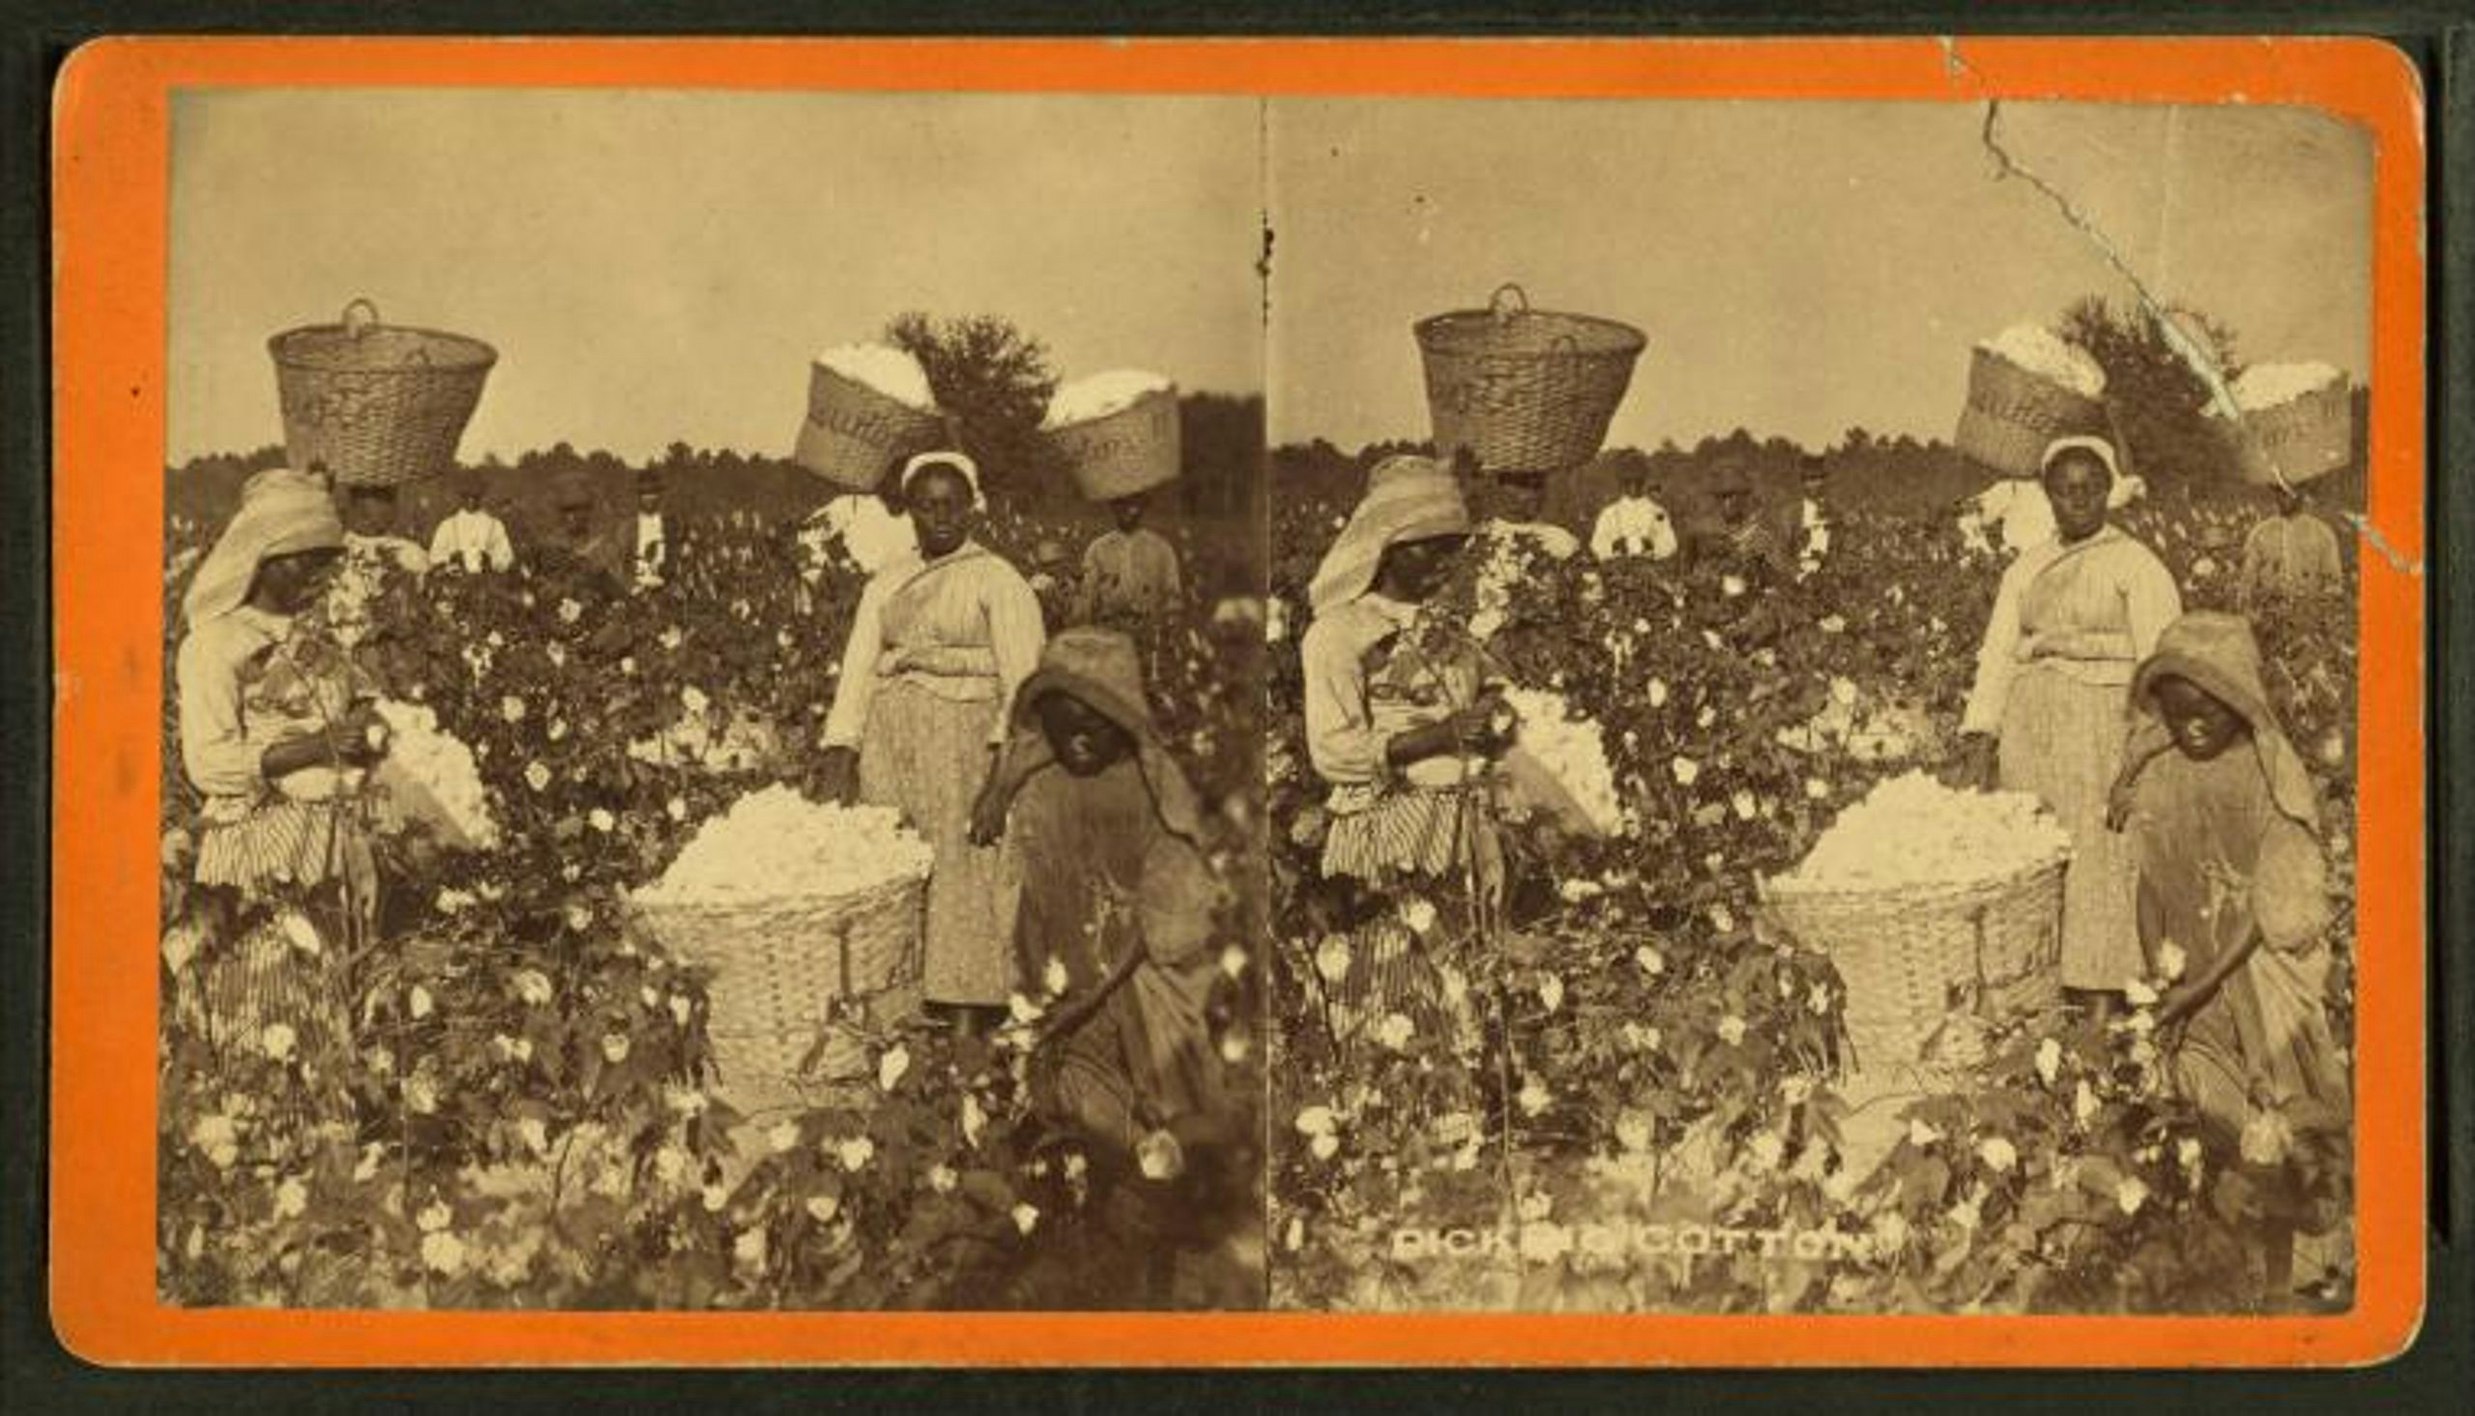 Black women and children picking baskets of cotton in the fields